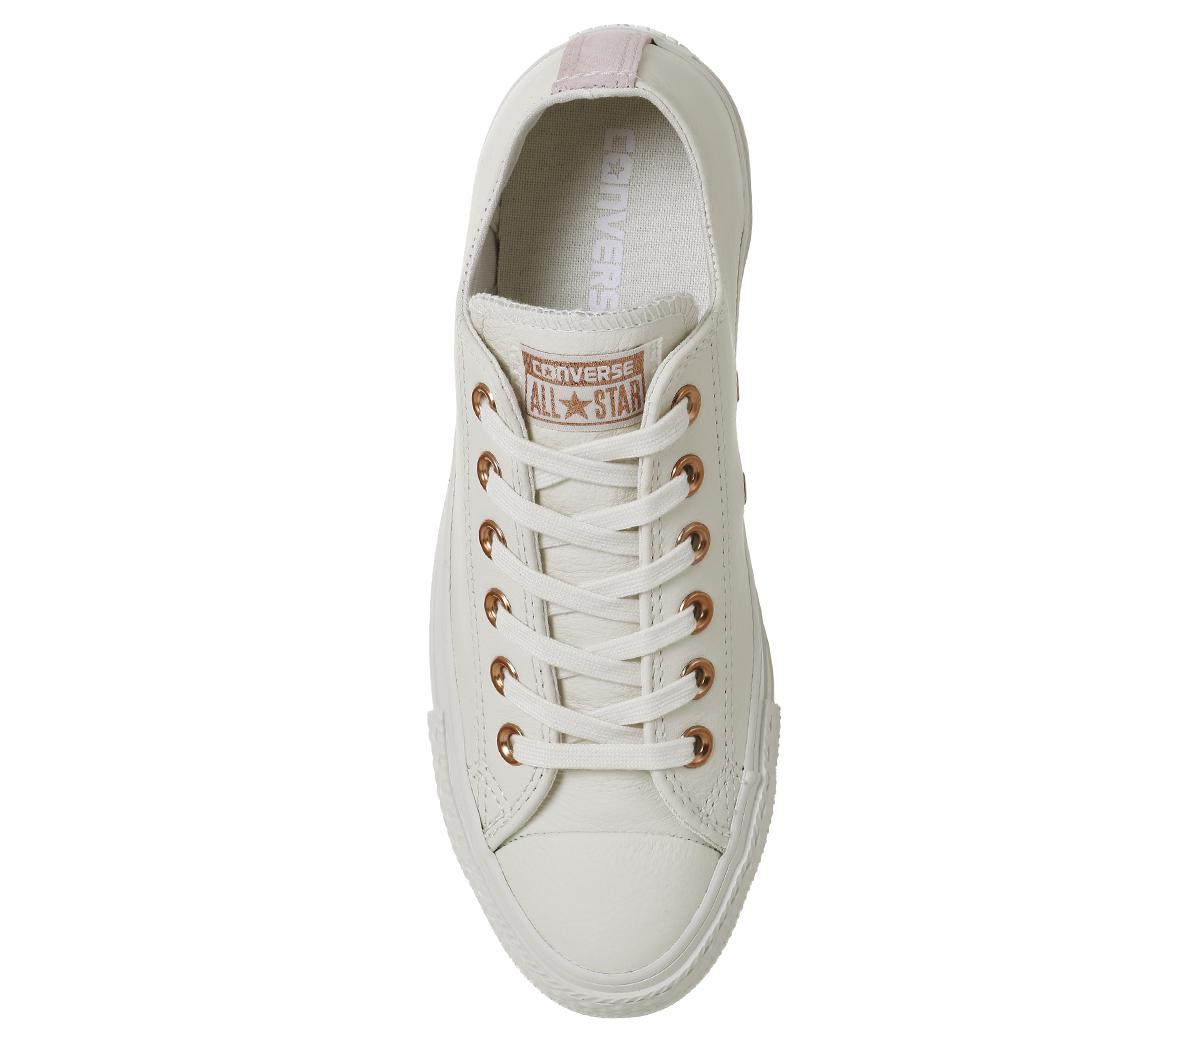 Converse All Star Low Leather Trainers Egret Vapour Pink - Hers trainers